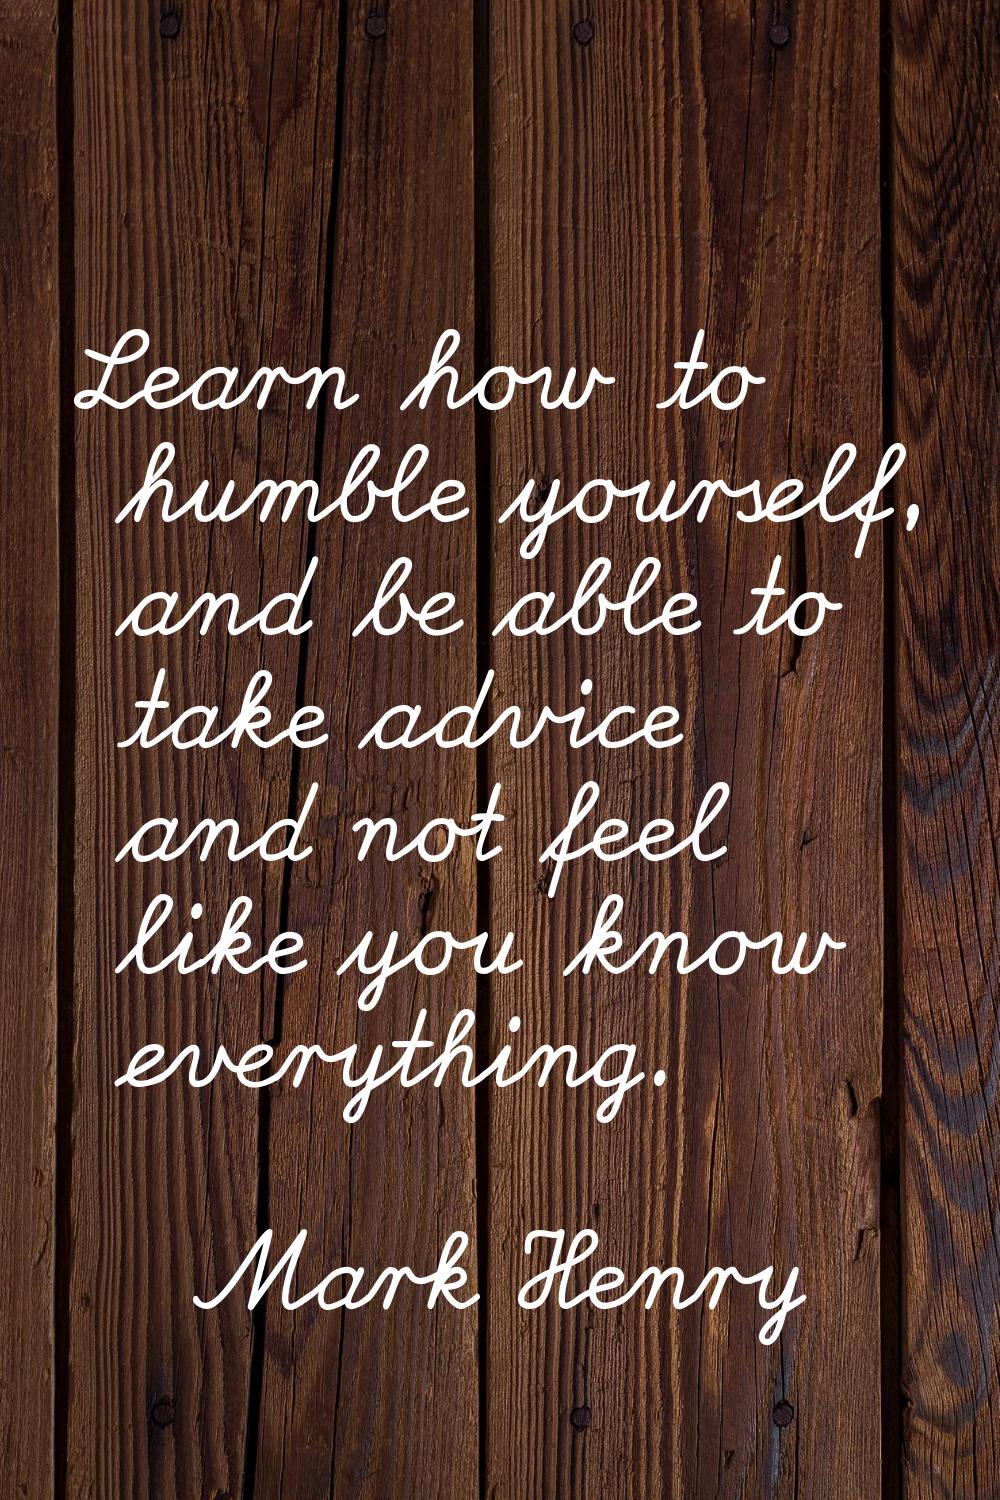 Learn how to humble yourself, and be able to take advice and not feel like you know everything.